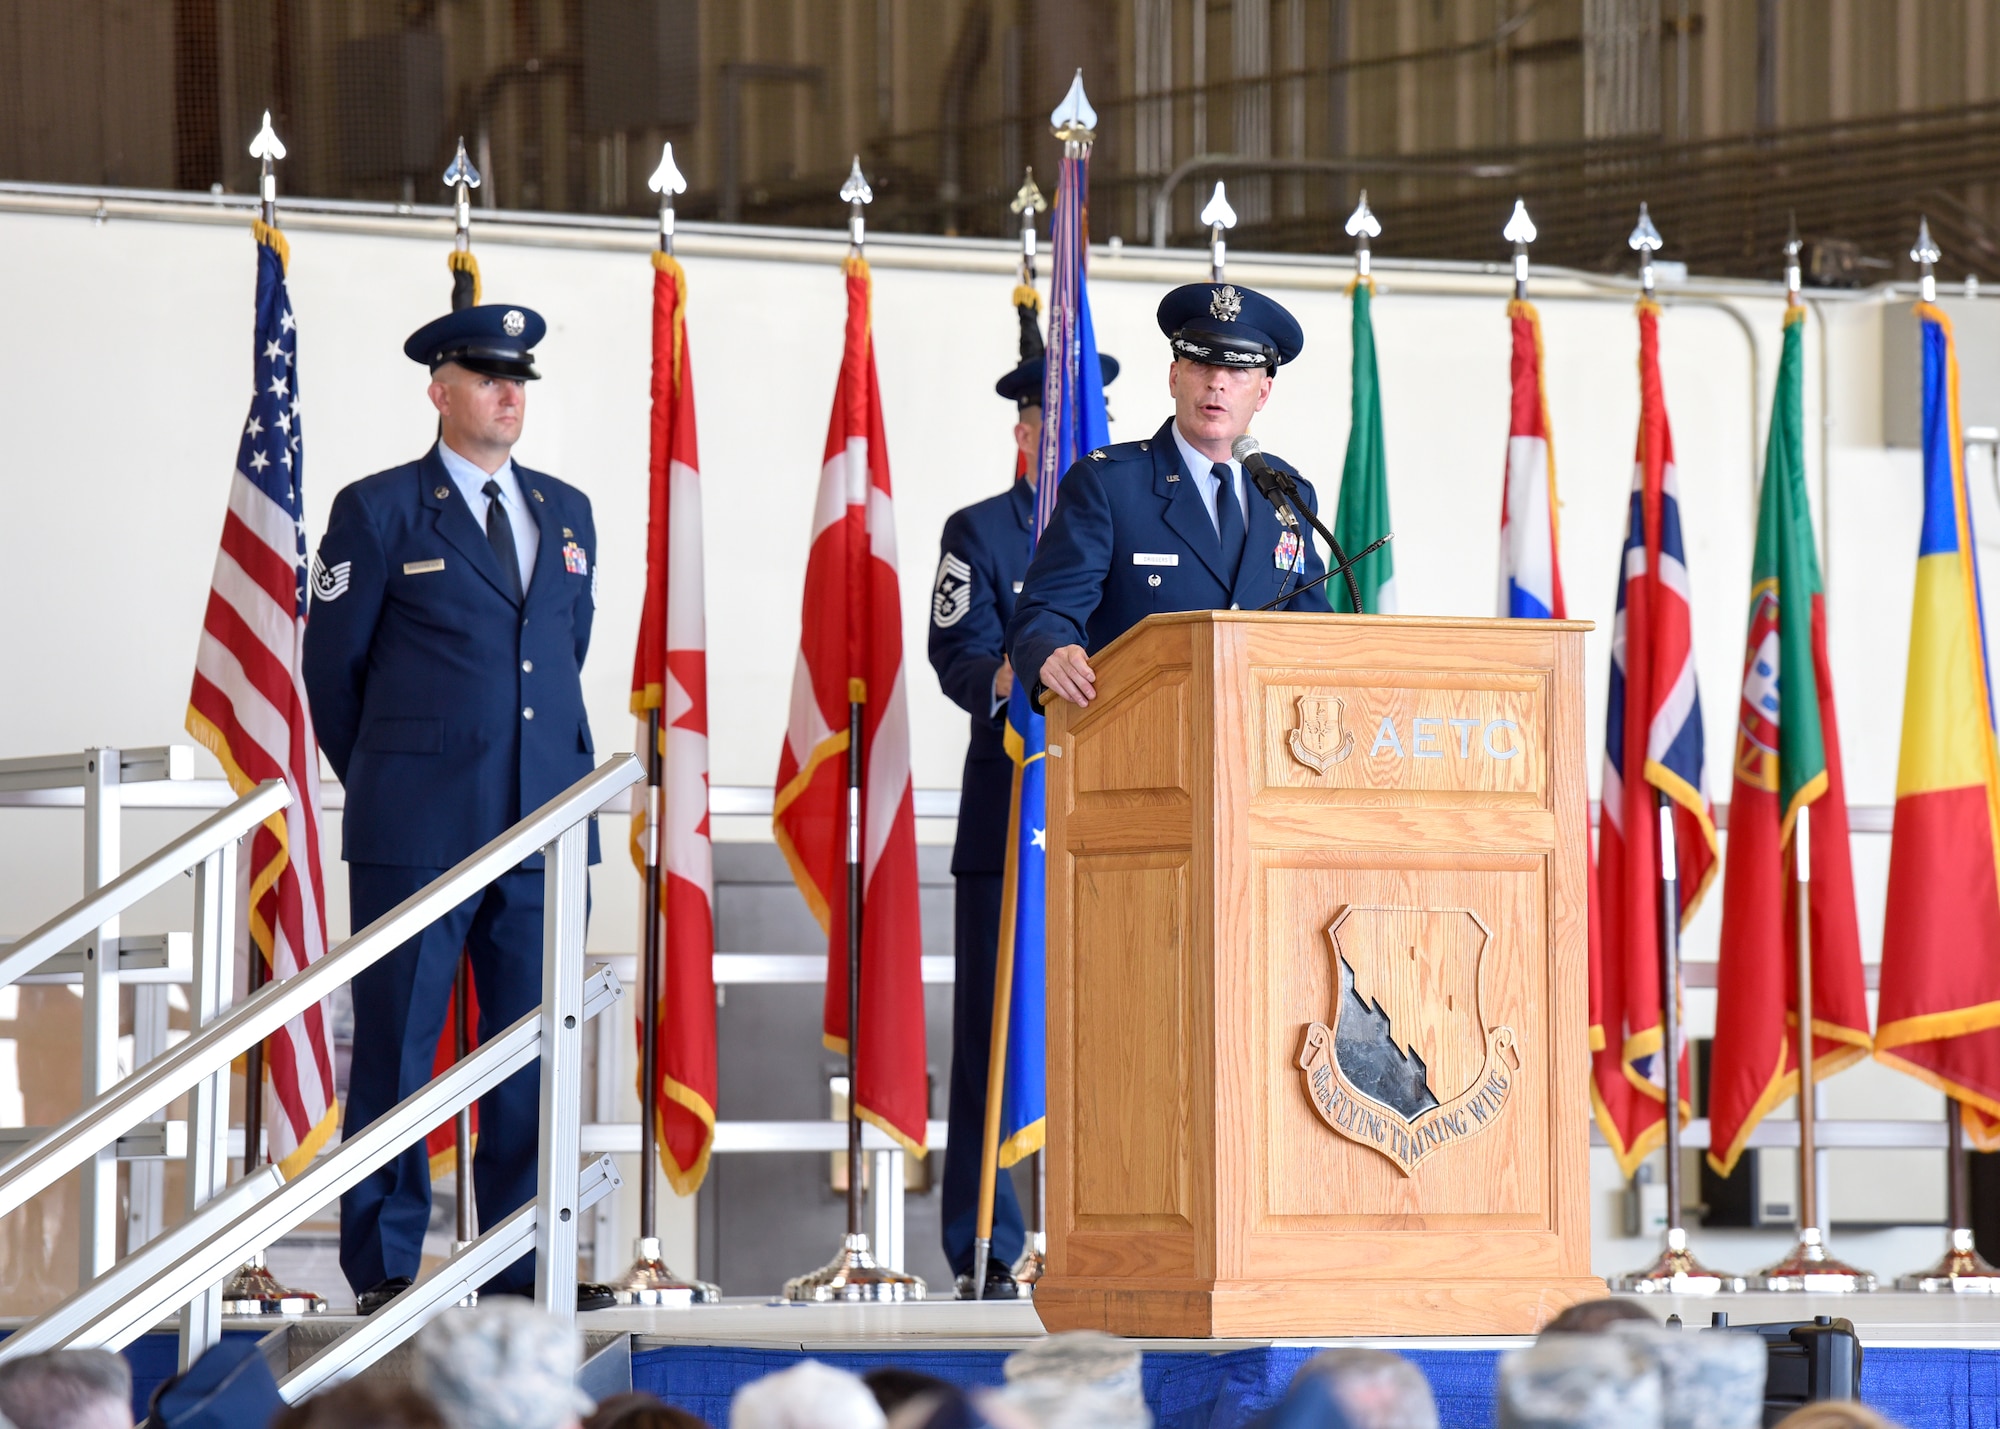 Col. Russell Driggers, 80th Flying Training Wing commander, stands at a podium and gives his first message.